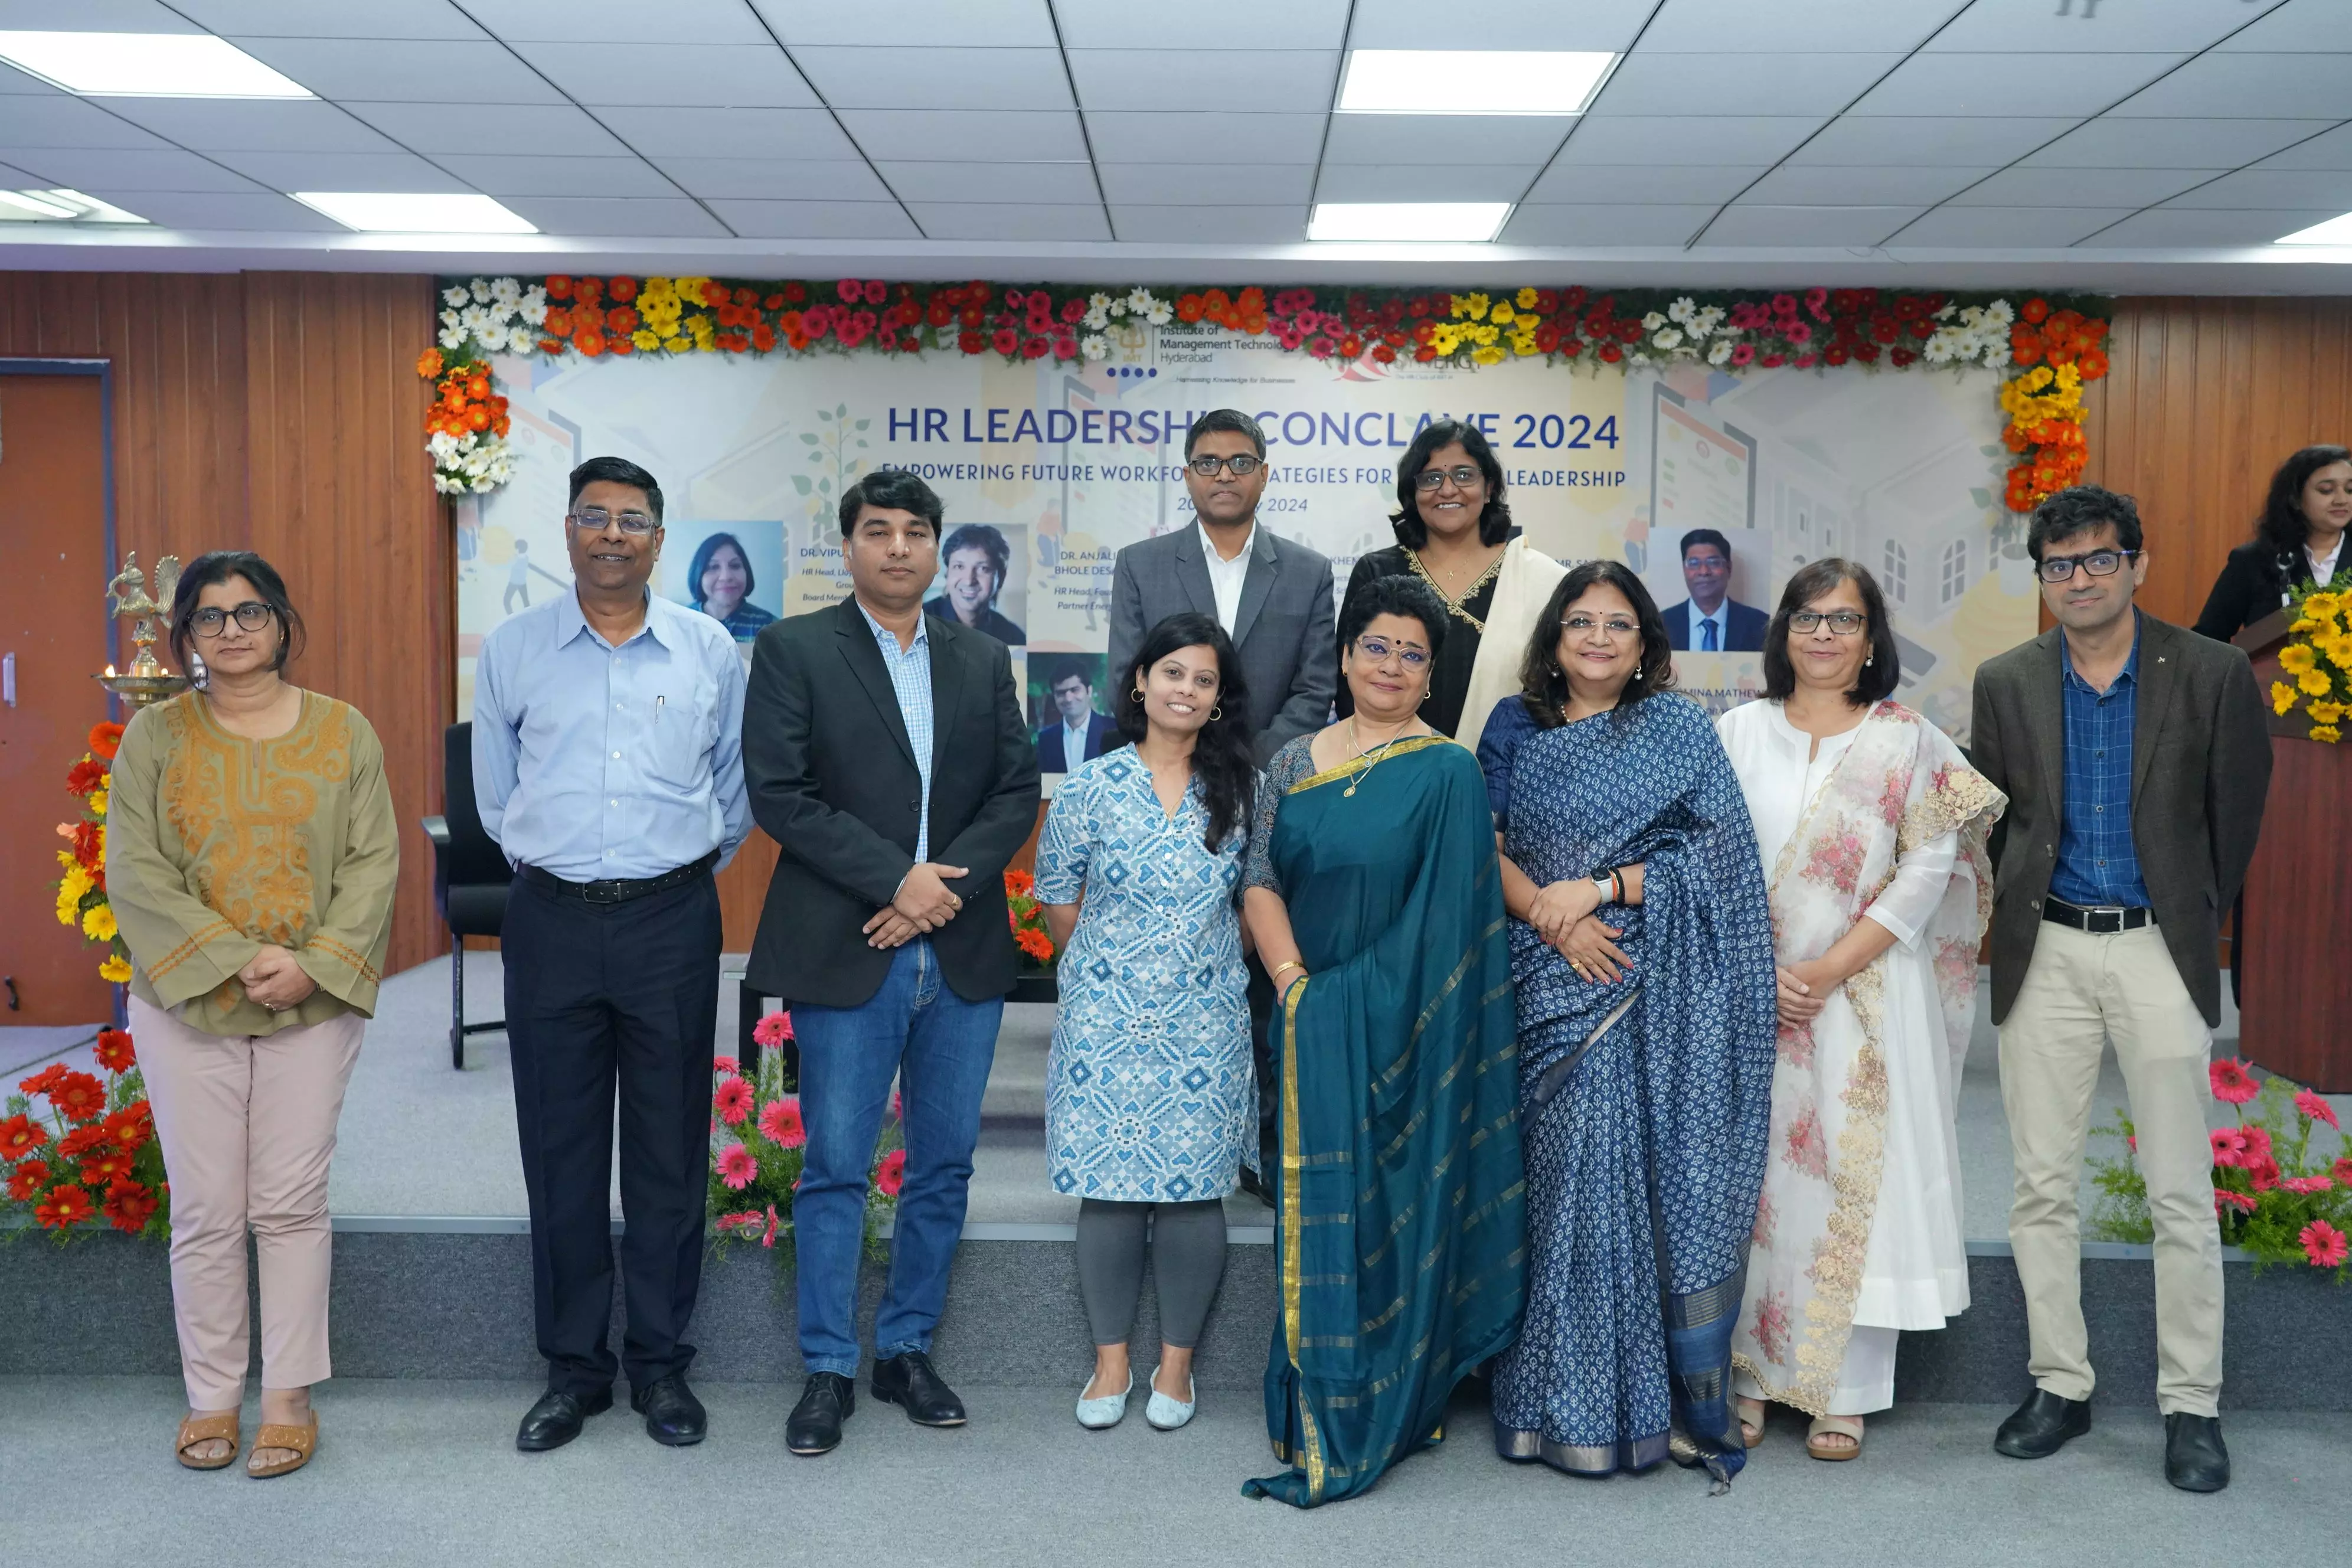 IMT Hyderabad Hosts HR Conclave on Inclusive Leadership Strategies